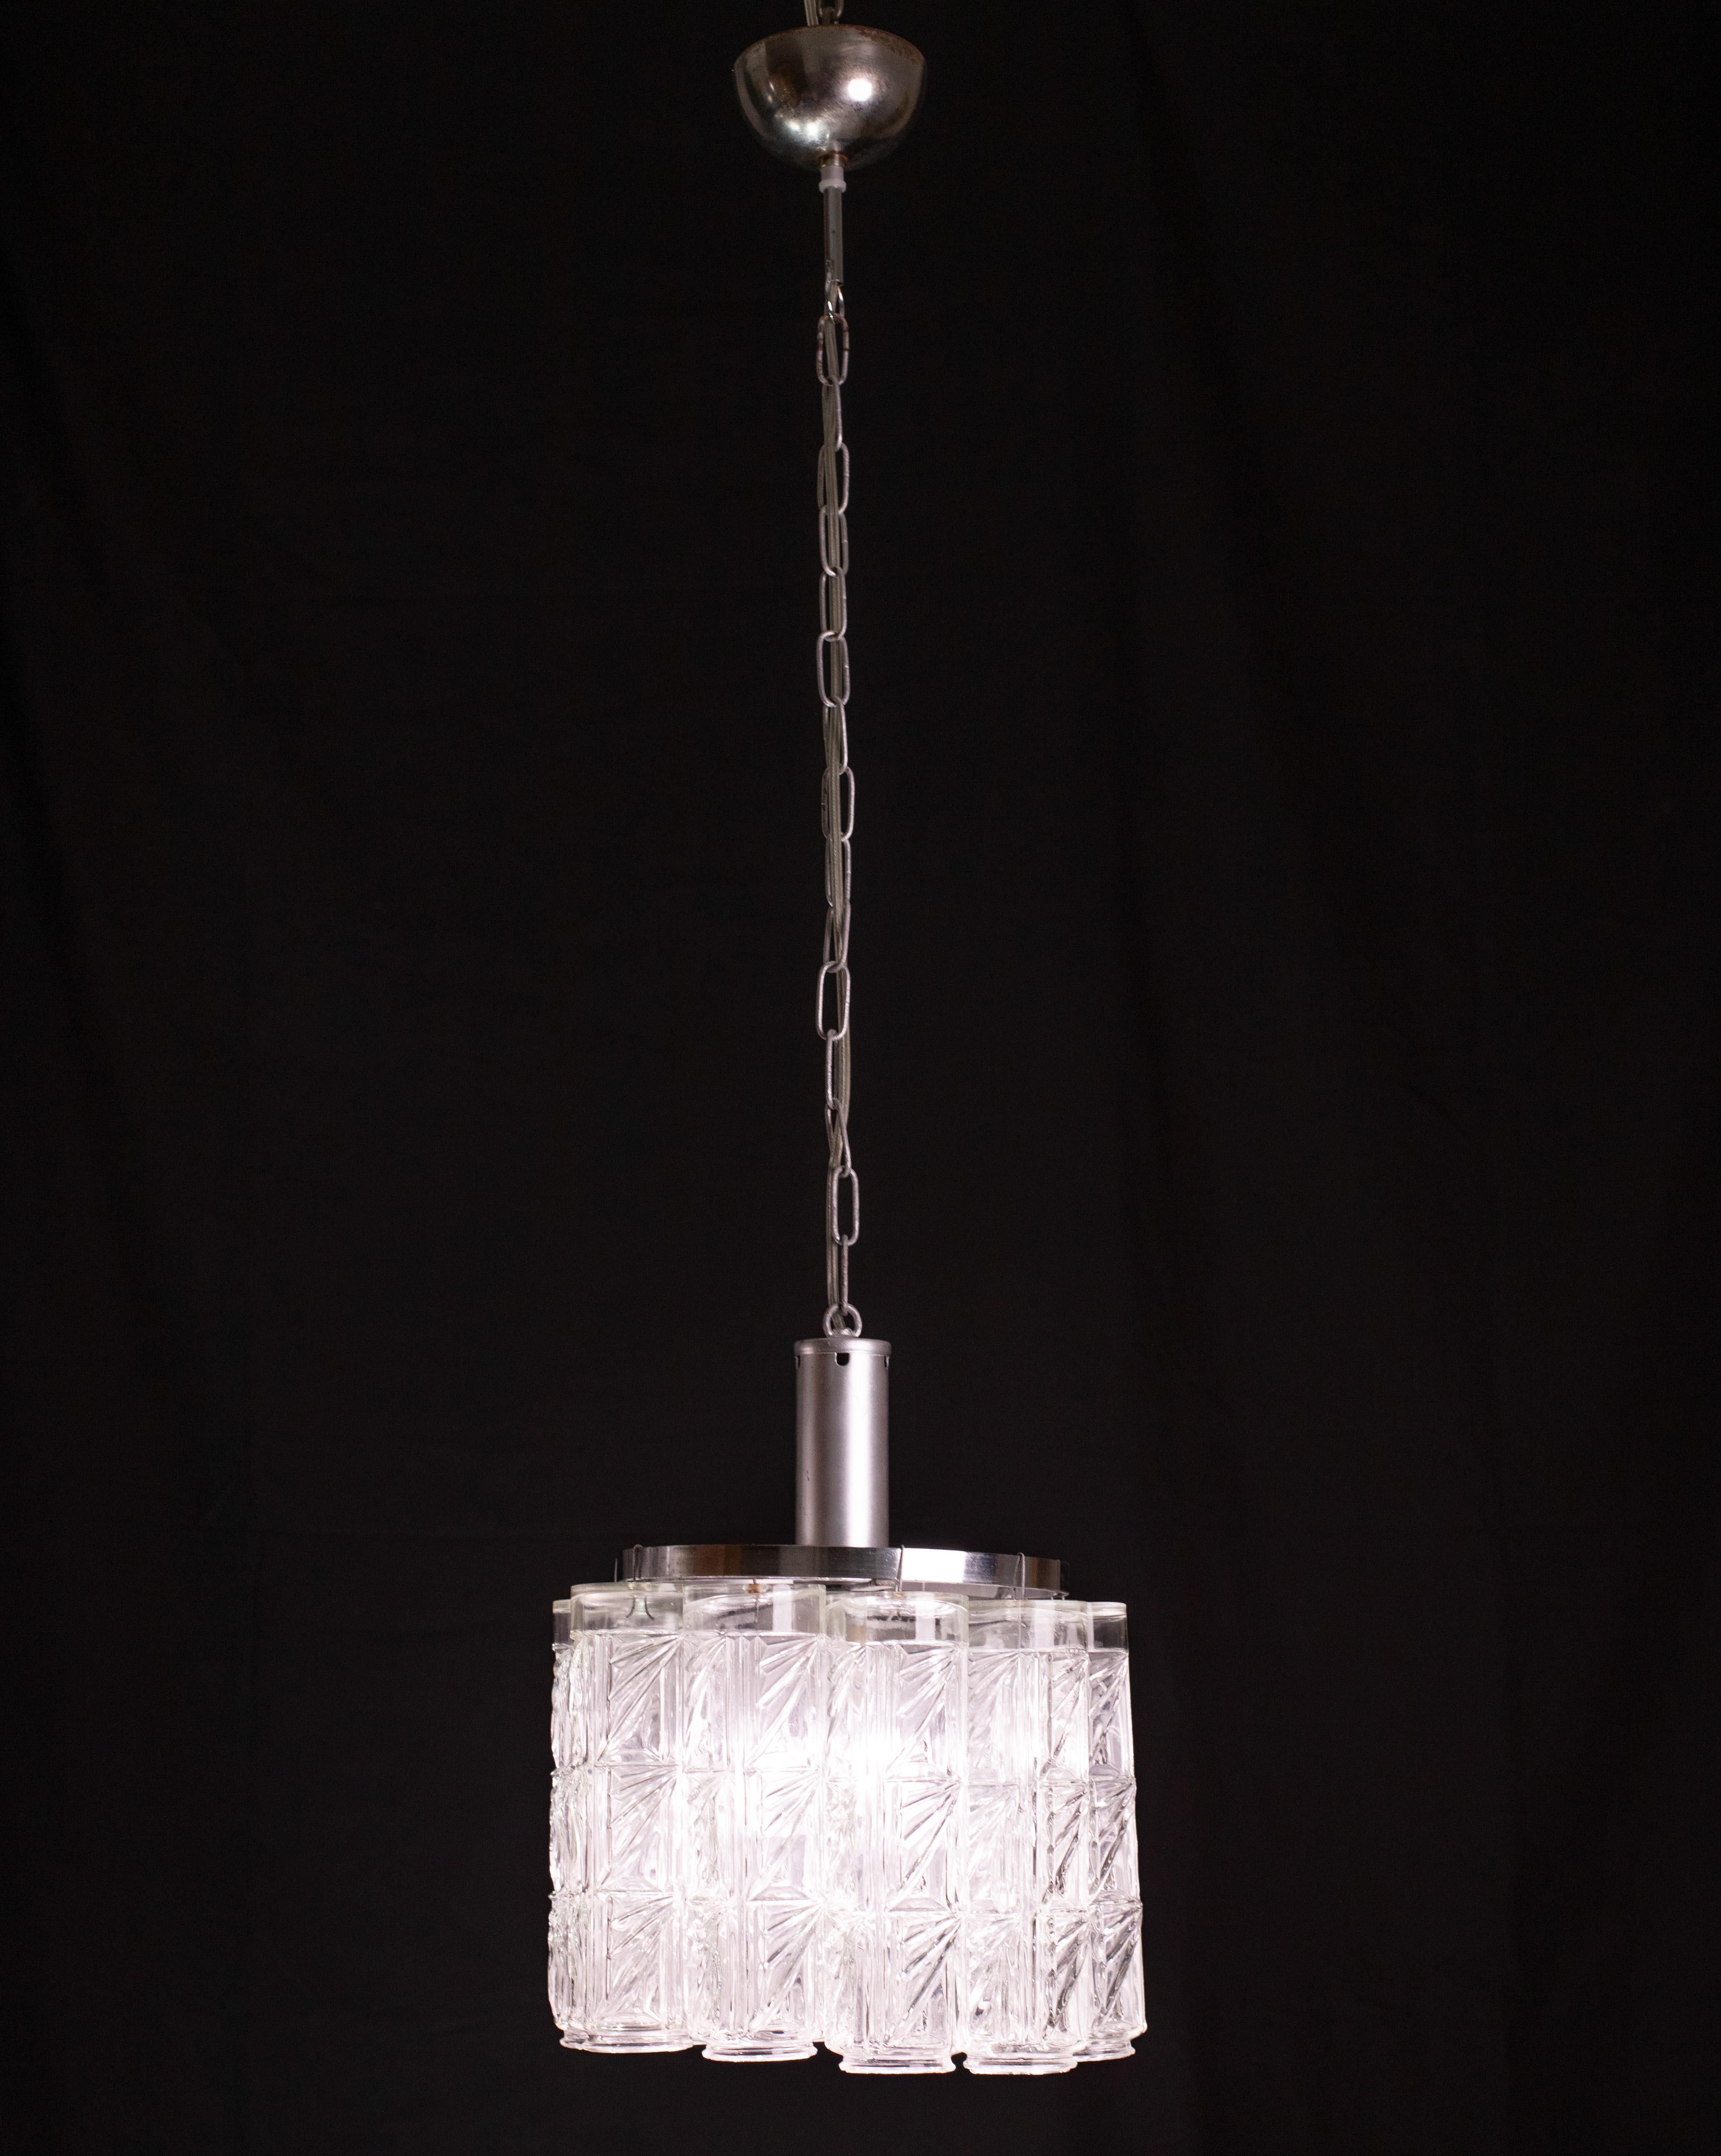 1960s Murano chandelier 10 transparent logs.
The chandelier currently mounts 1 light, possible to rewire for Usa standard.
The total height of the chandelier measures 105 centimetres with chain, 40 centimetres without chain, the diameter measures 31